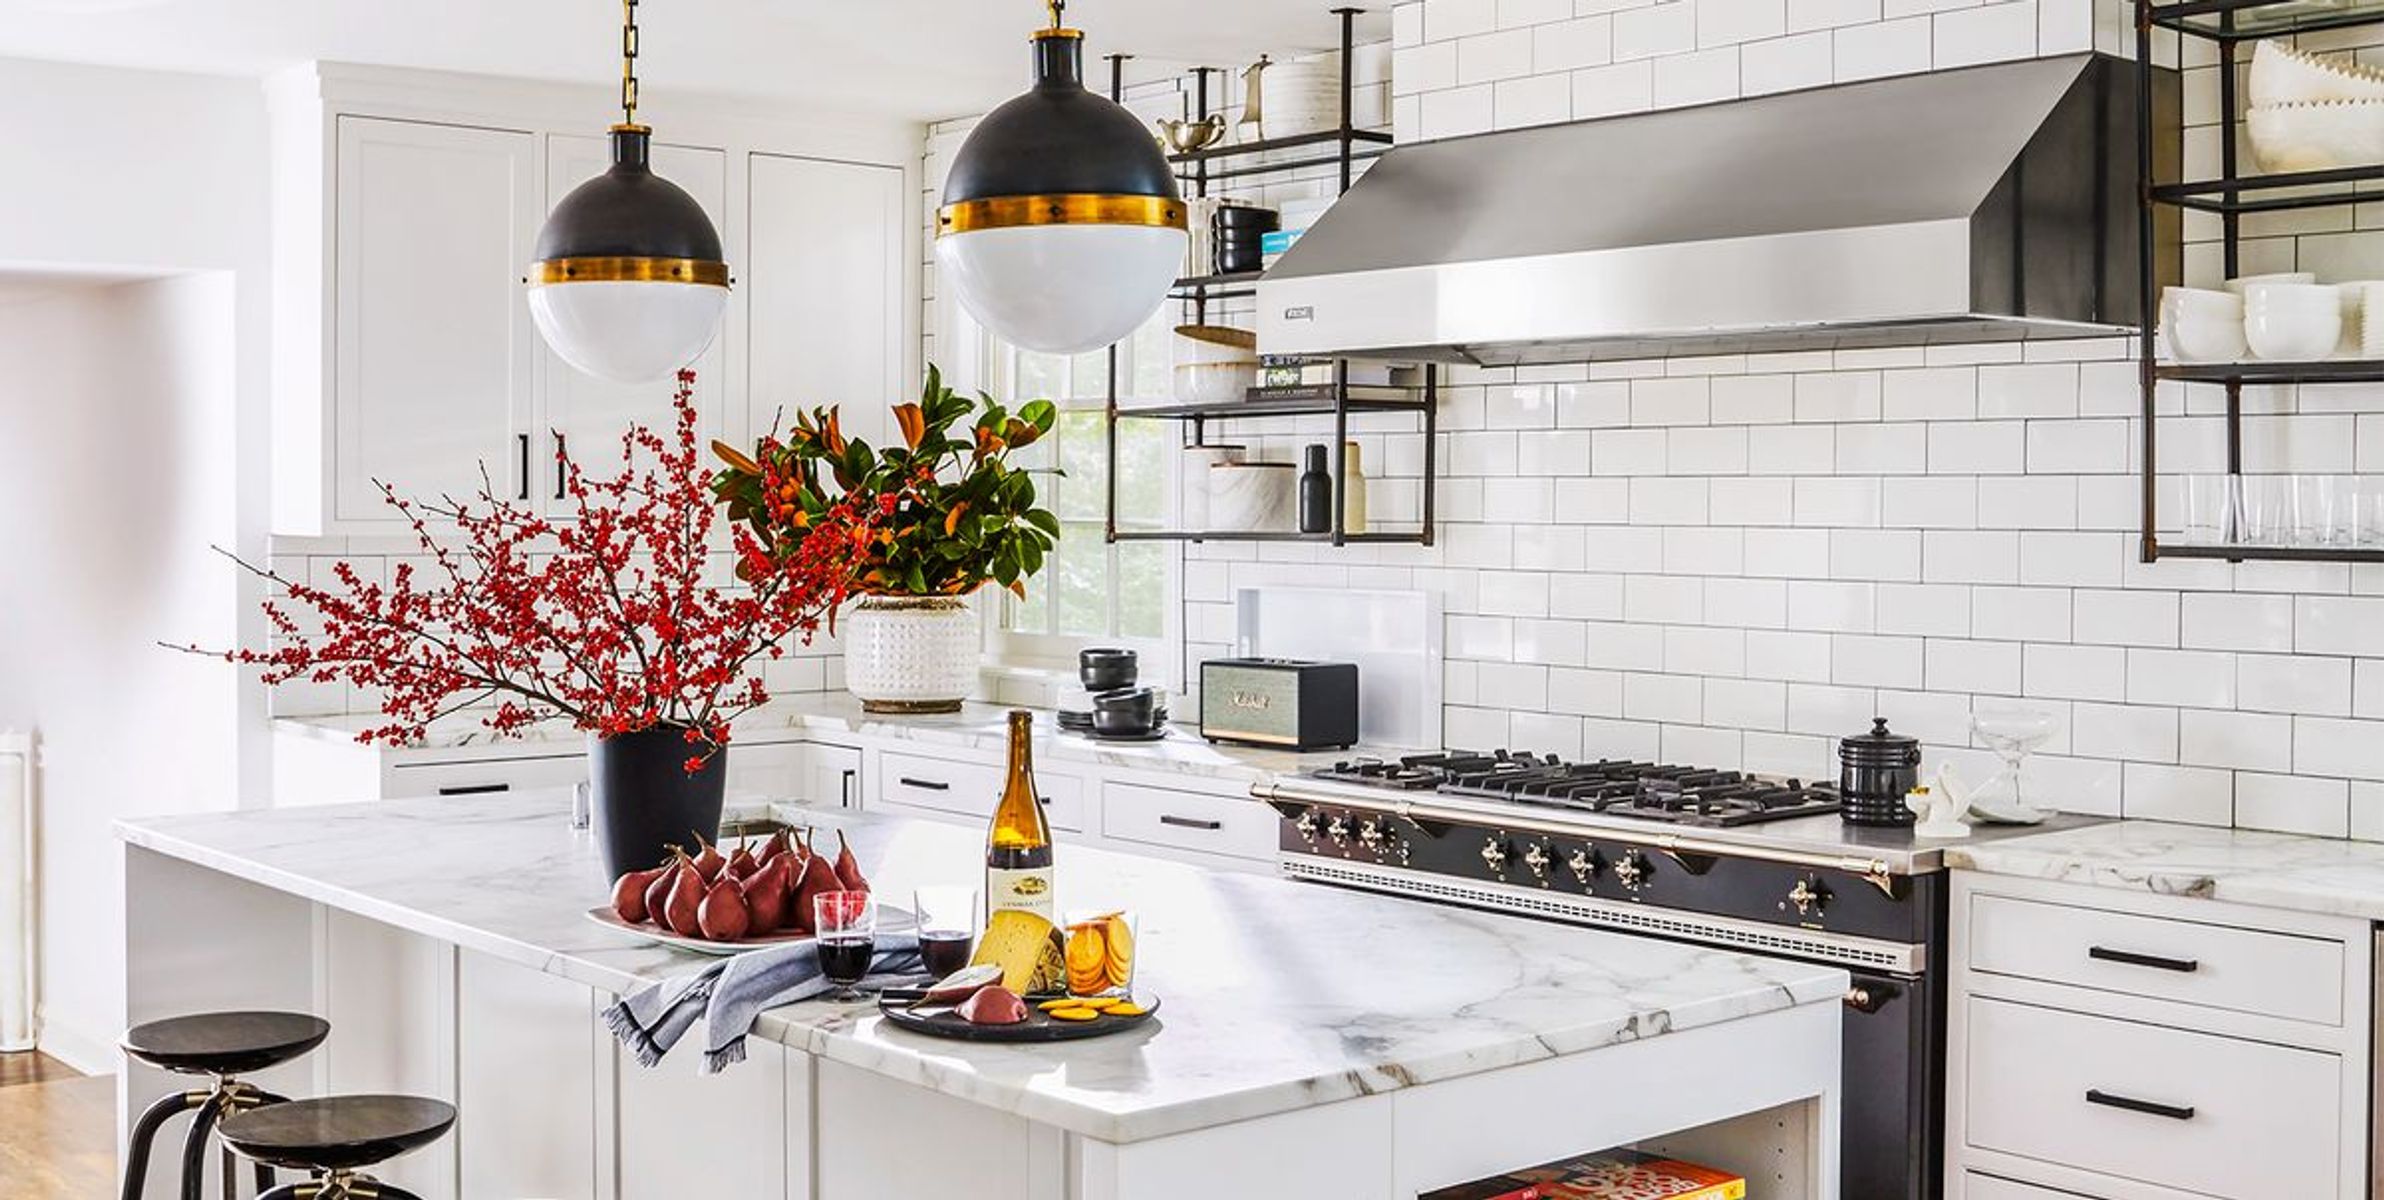 Modern White Kitchens? Tips to Clean and Maintain Your White Cabinets